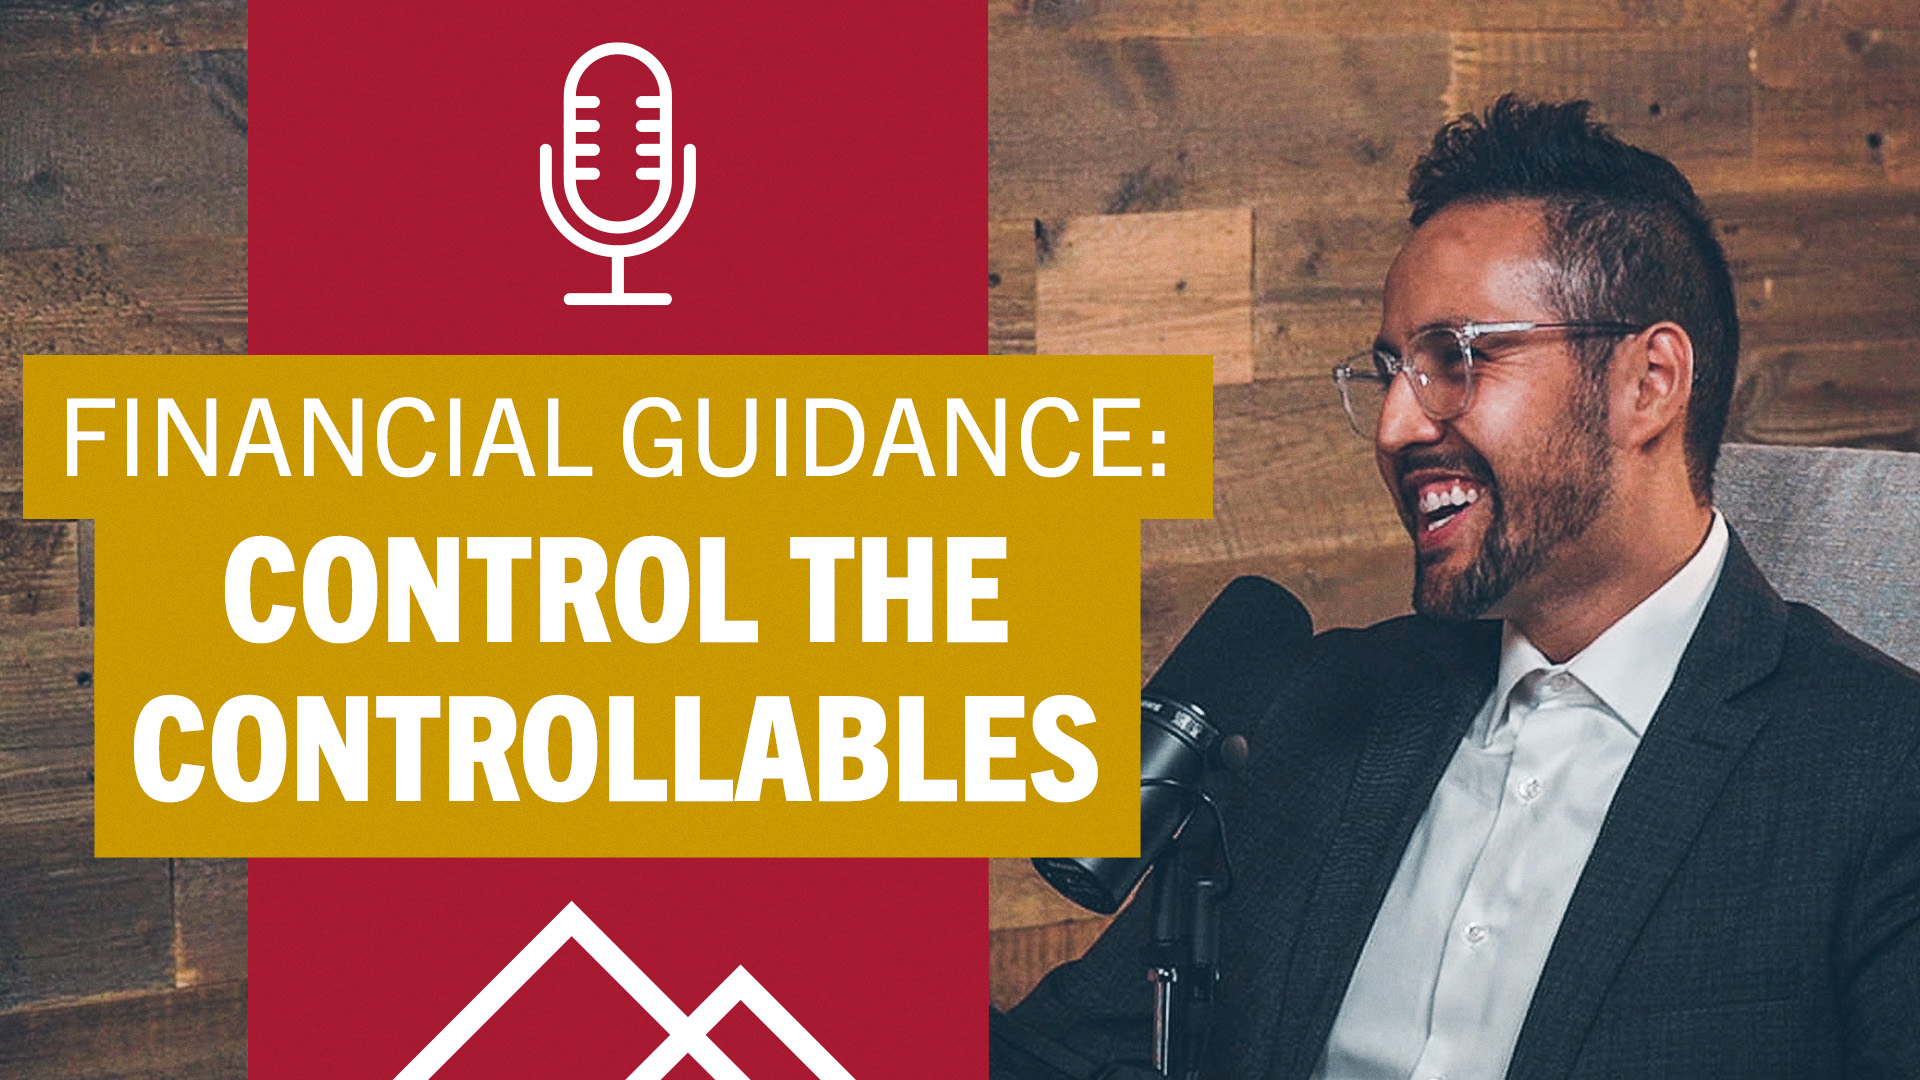 Peter Carrera in front of the podcast microphone with text "Financial Guidance: Control the Controllables"